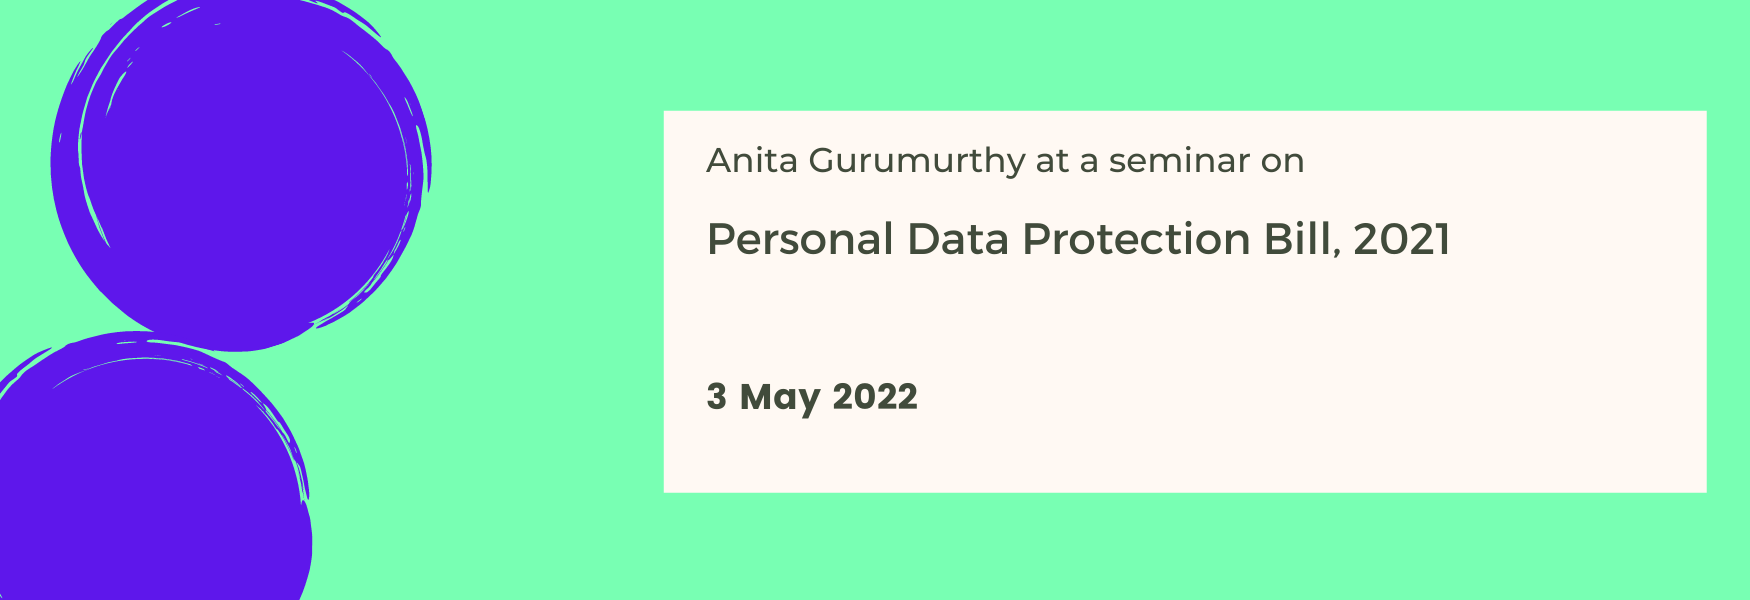 Seminar on the Personal Data Protection Bill, 2021